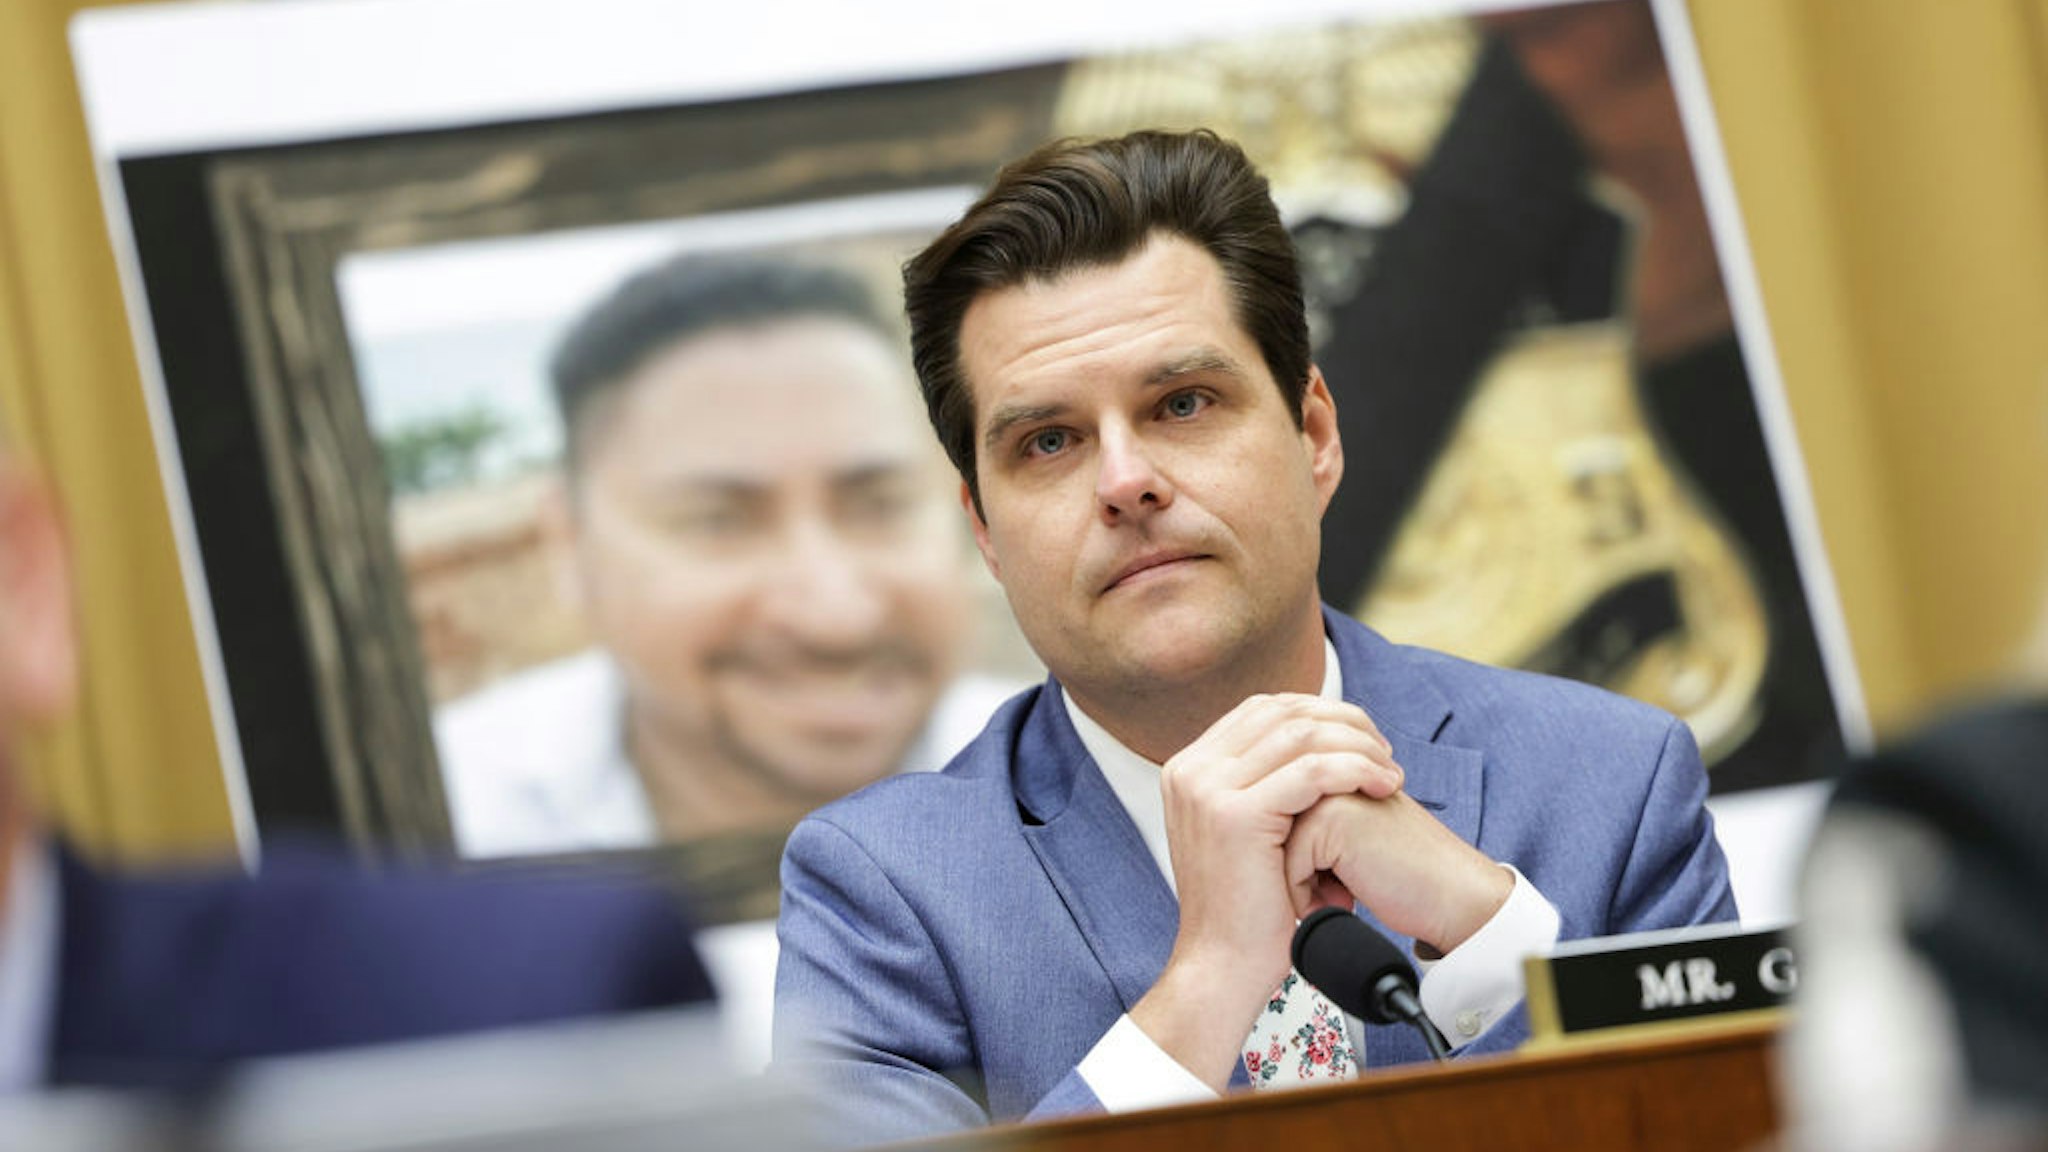 U.S. Rep Matt Gaetz (R-FL) questions U.S. Homeland Security Secretary Alejandro Mayorkas as he testifies before the House Judicary Committee at the Rayburn House Office Building on April 28, 2022 in Washington, DC.